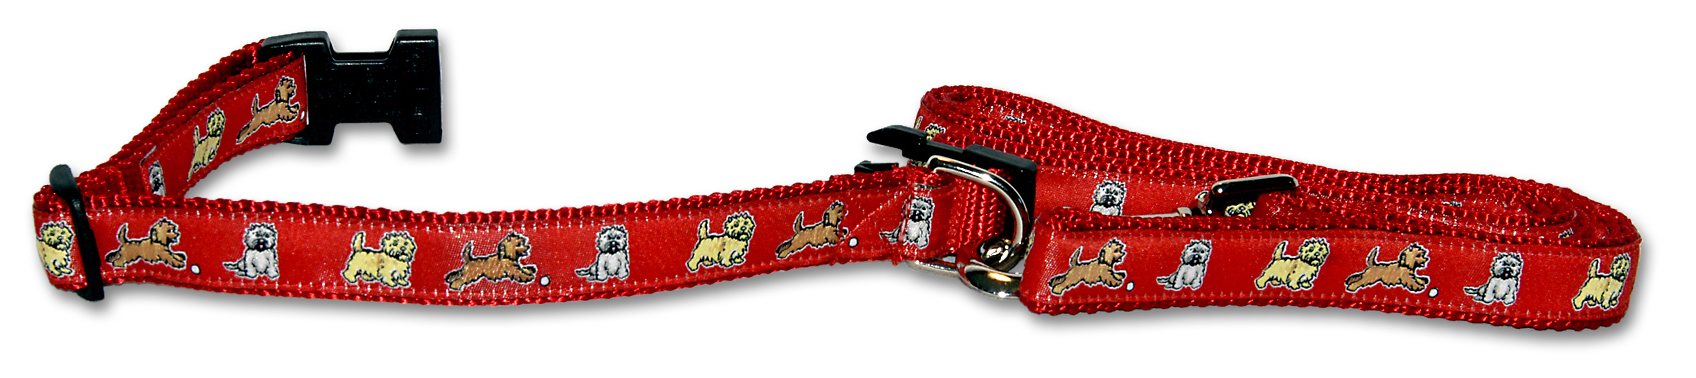 Dog Ink Collars Cairn Red